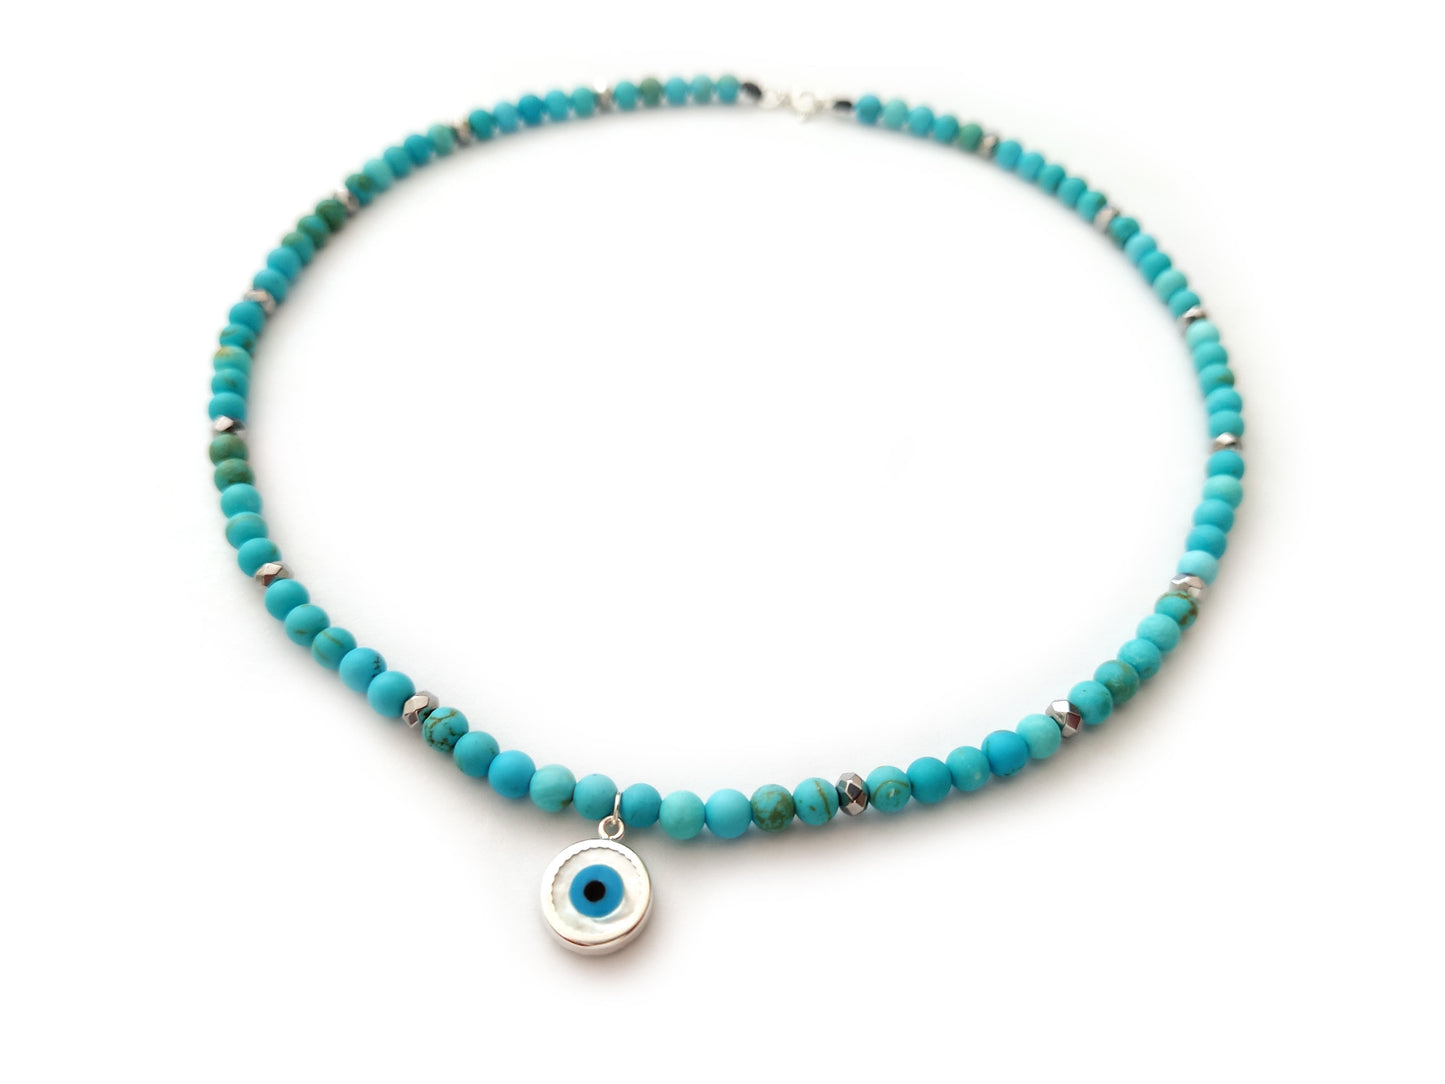 Handmade Natural Turquoise Stone Necklace with 4mm beads and Sterling Silver Evil Eye pendant measuring 10mm (0.39 inches), Made In Greece. Free Shipping.